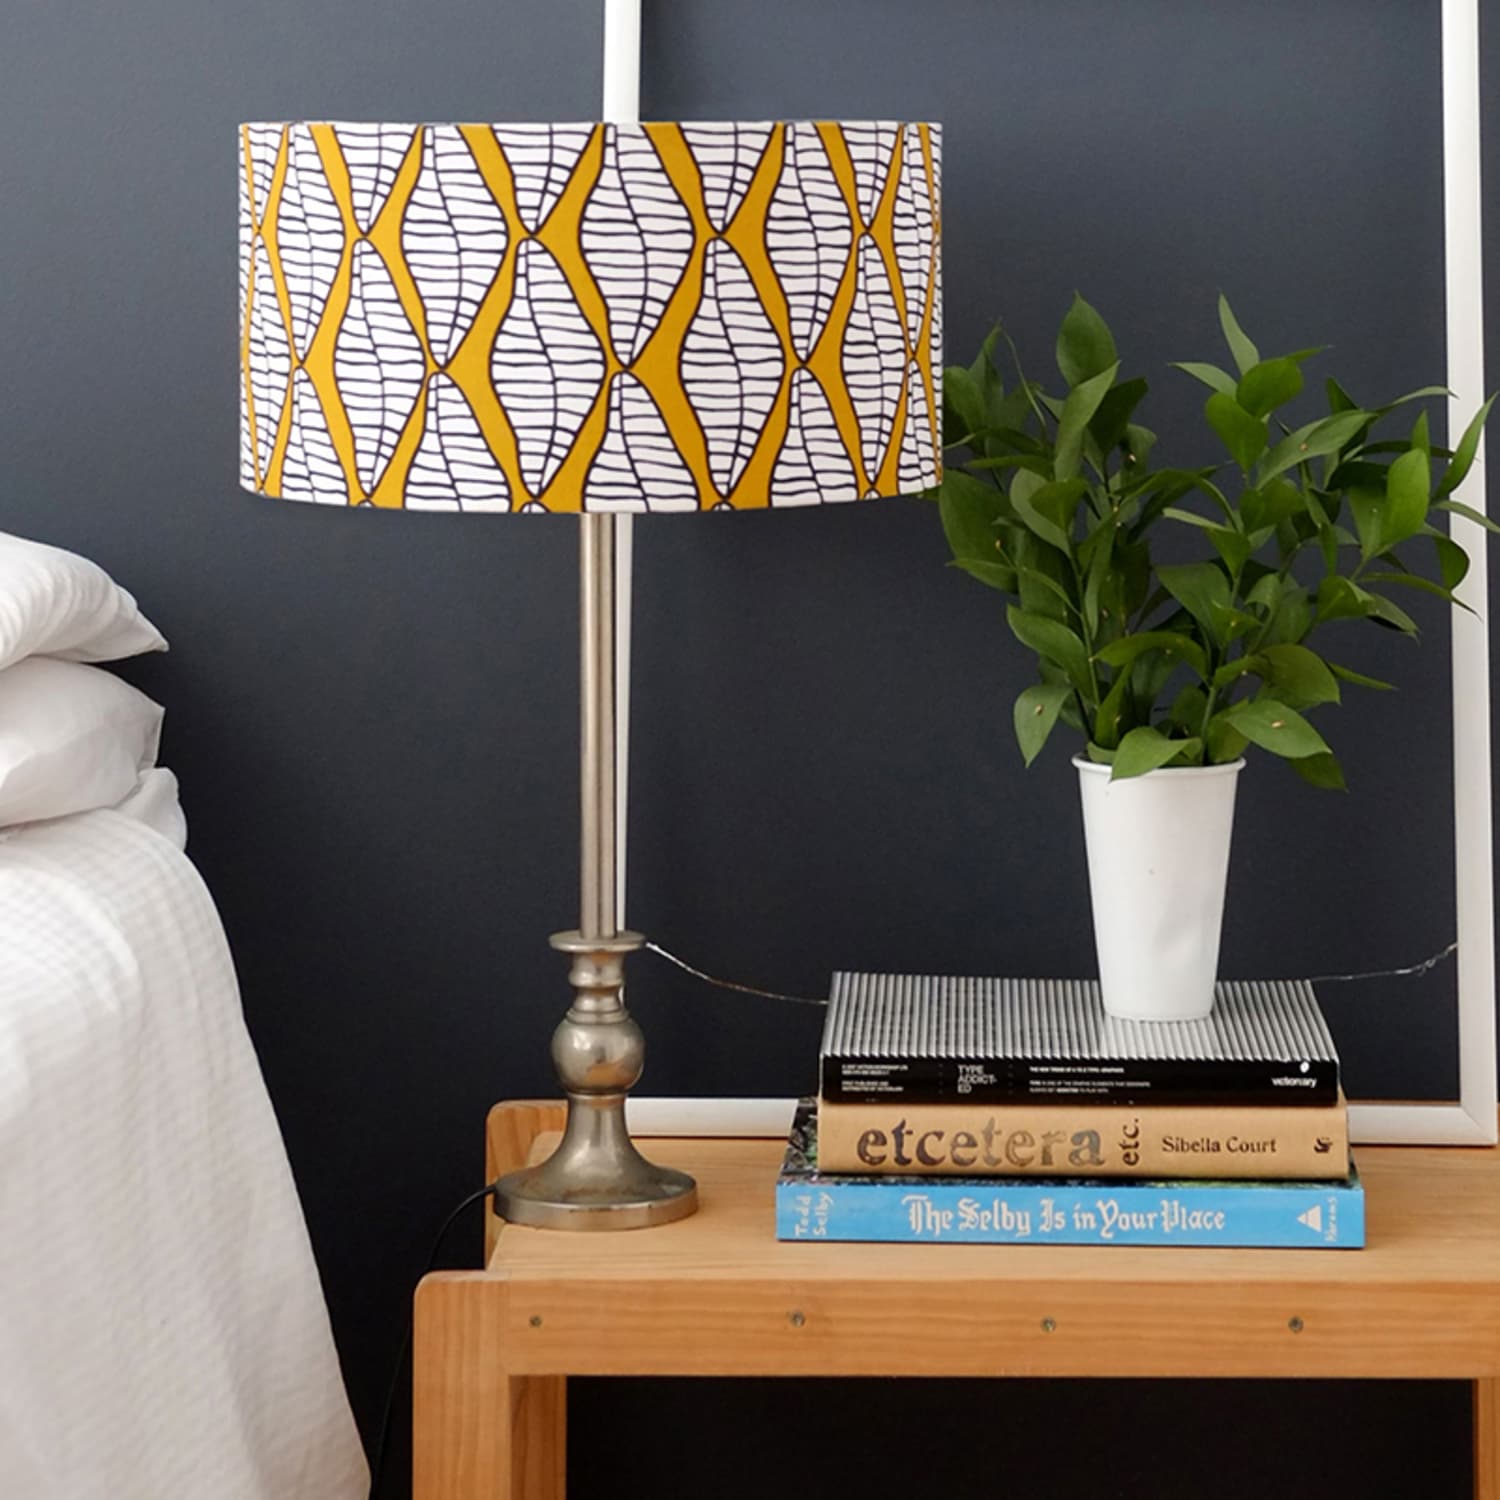 The Best Online Sources Lamp Shades: Lamps Plus, Minted, | Apartment Therapy